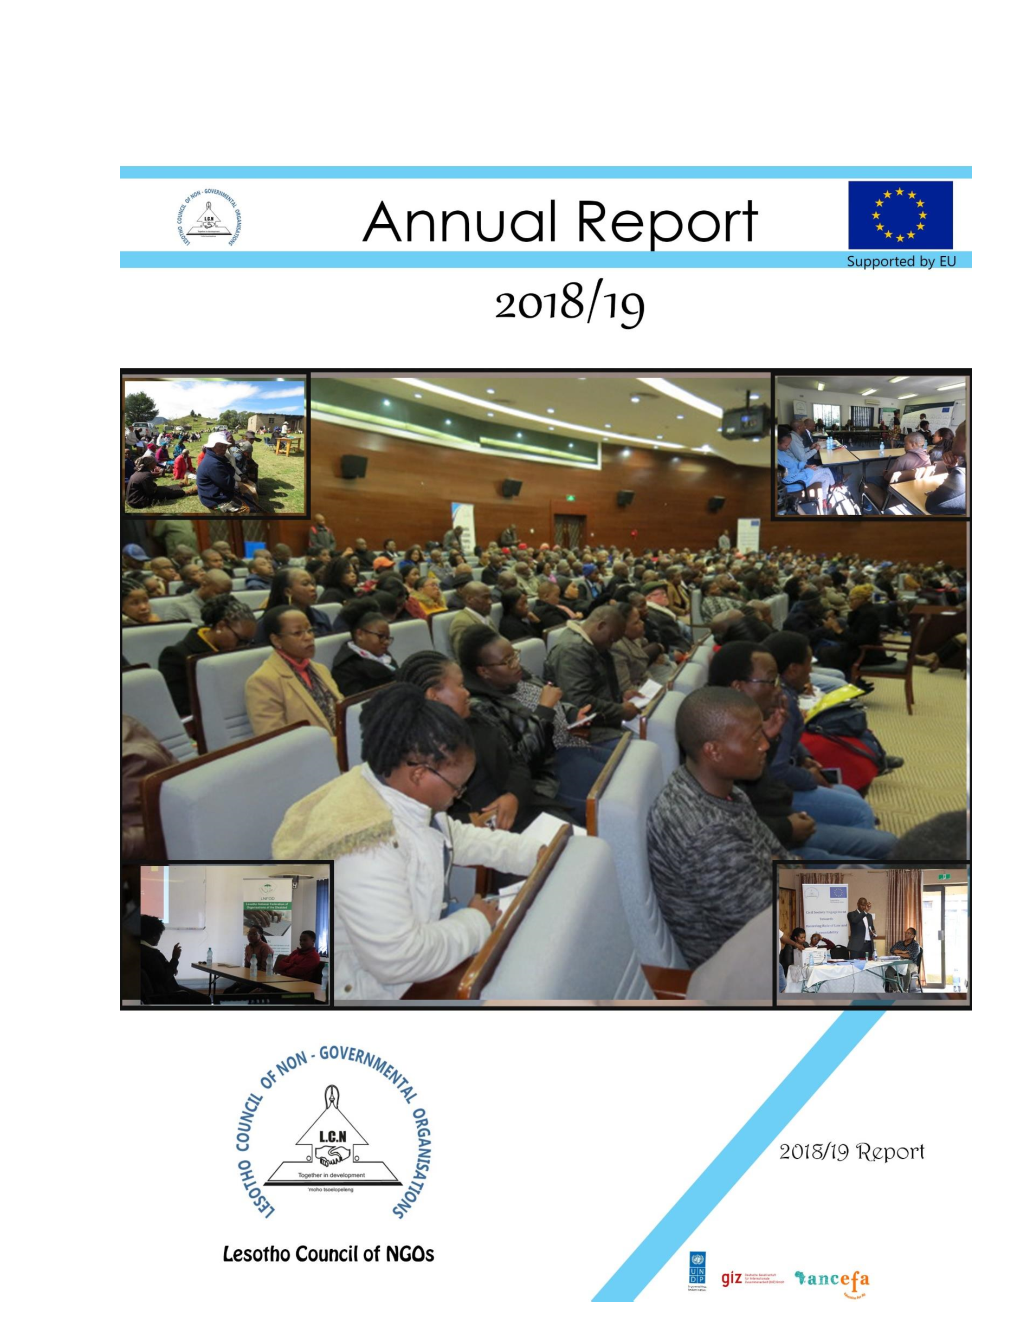 LCN Annual Report 2018-19, Prepared by the Lesotho Council